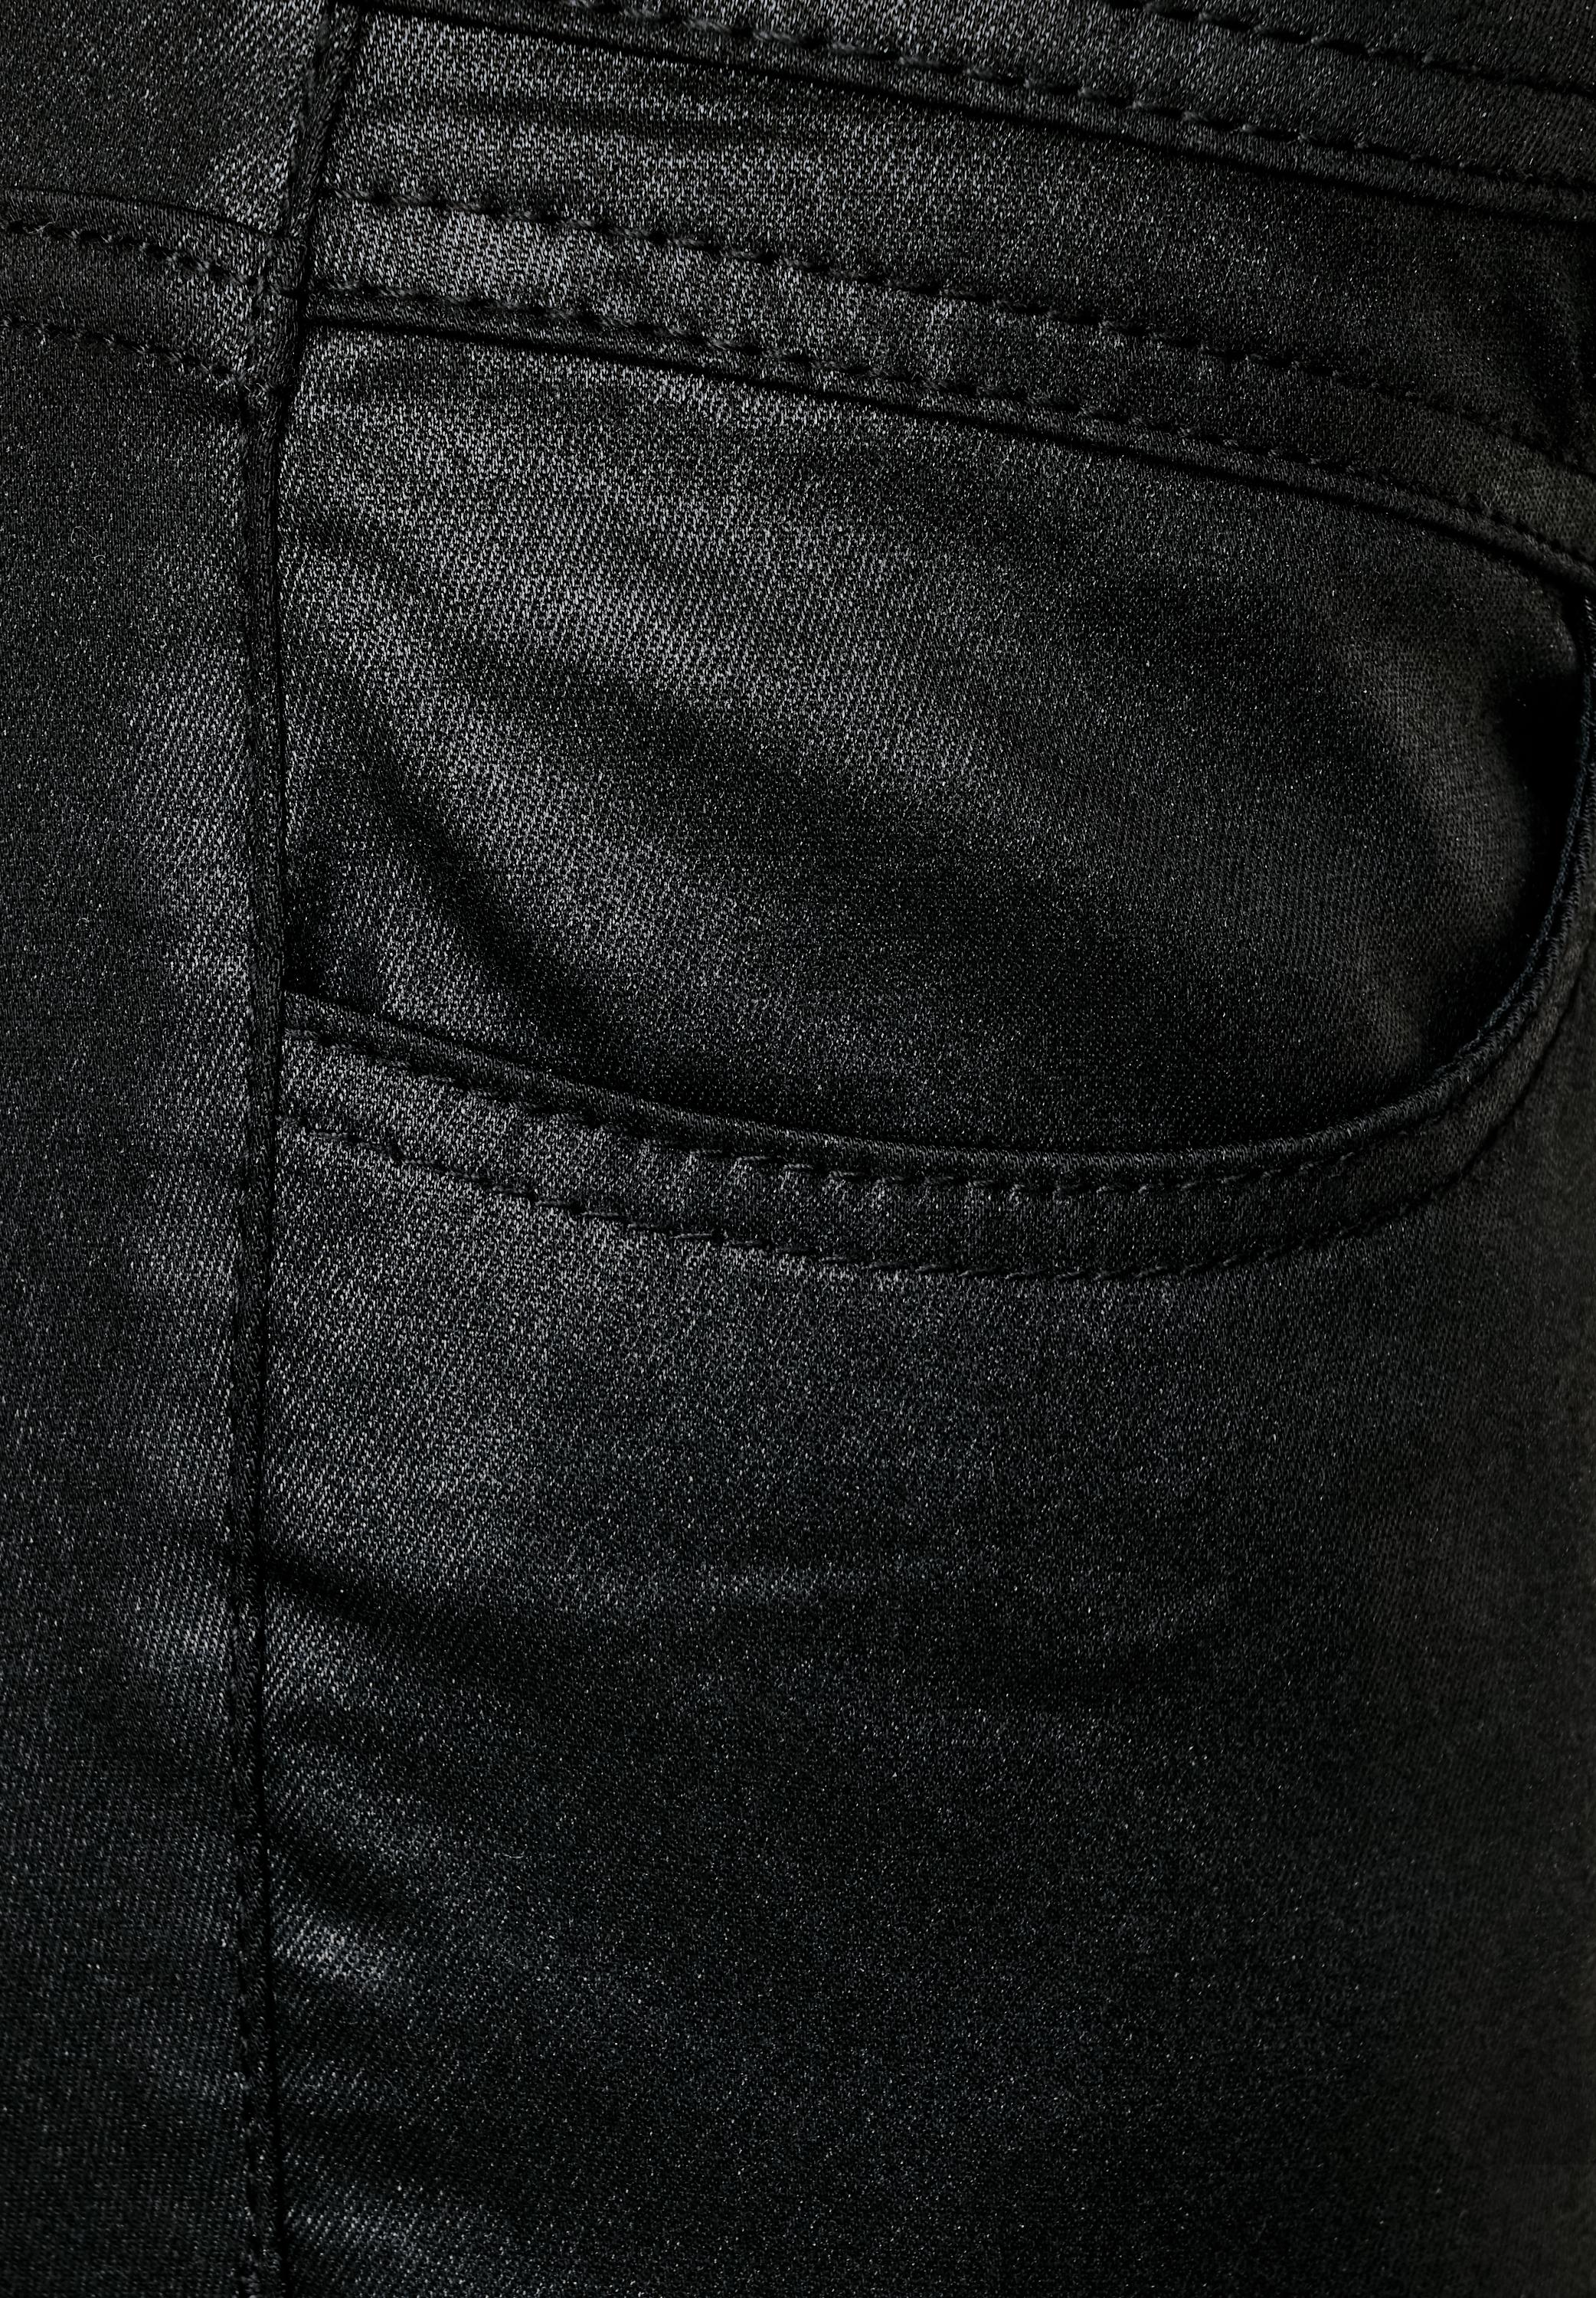 Waist Black CONCEPT Mode - Hose One Coating in A372683-12114 Street High York